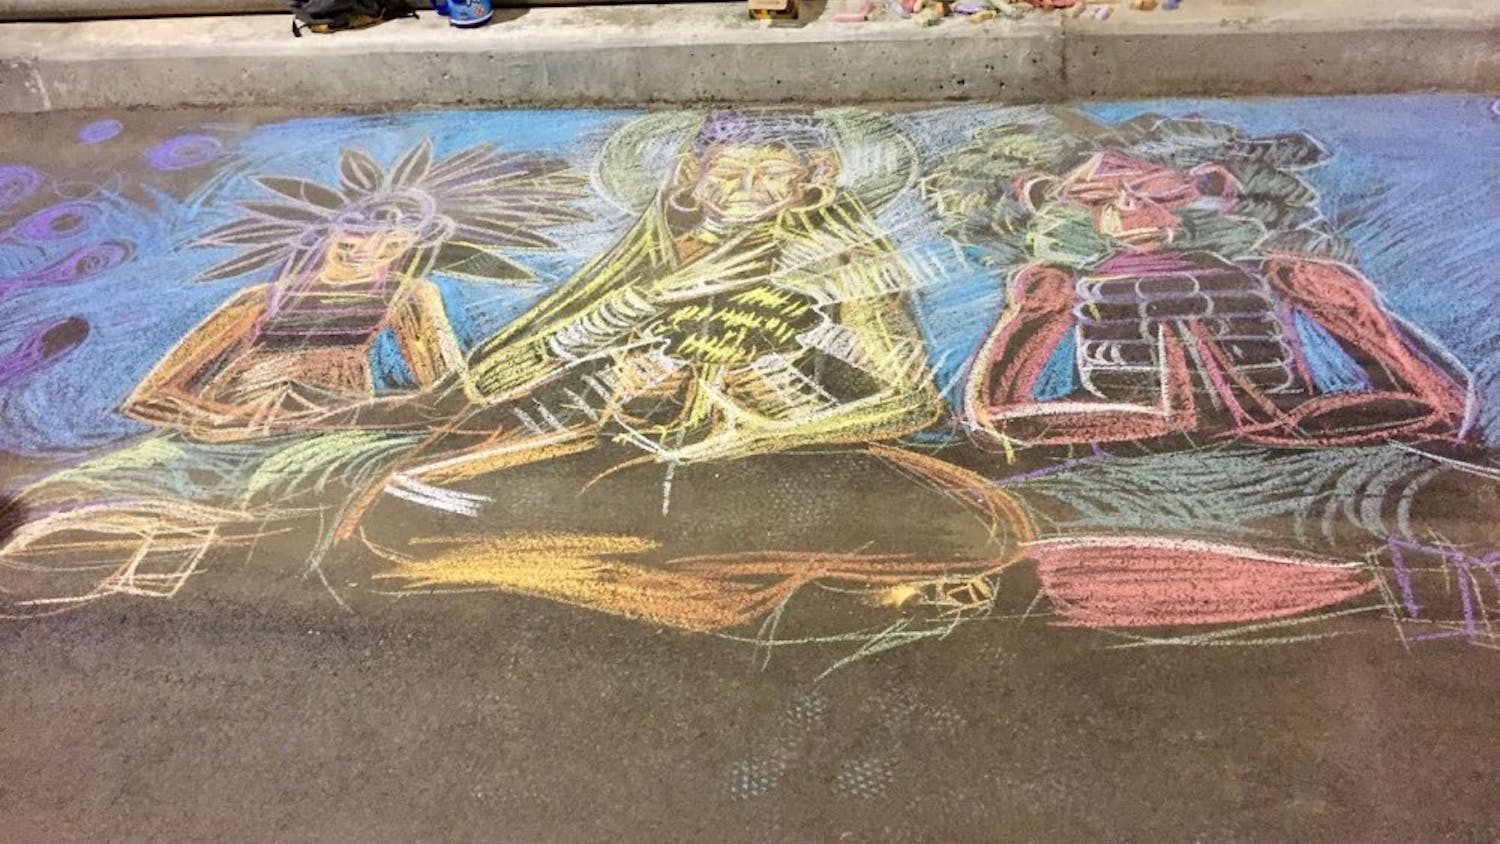 Inspiration for the chalk art in Lincoln Street tunnel came from a plethora of sources.